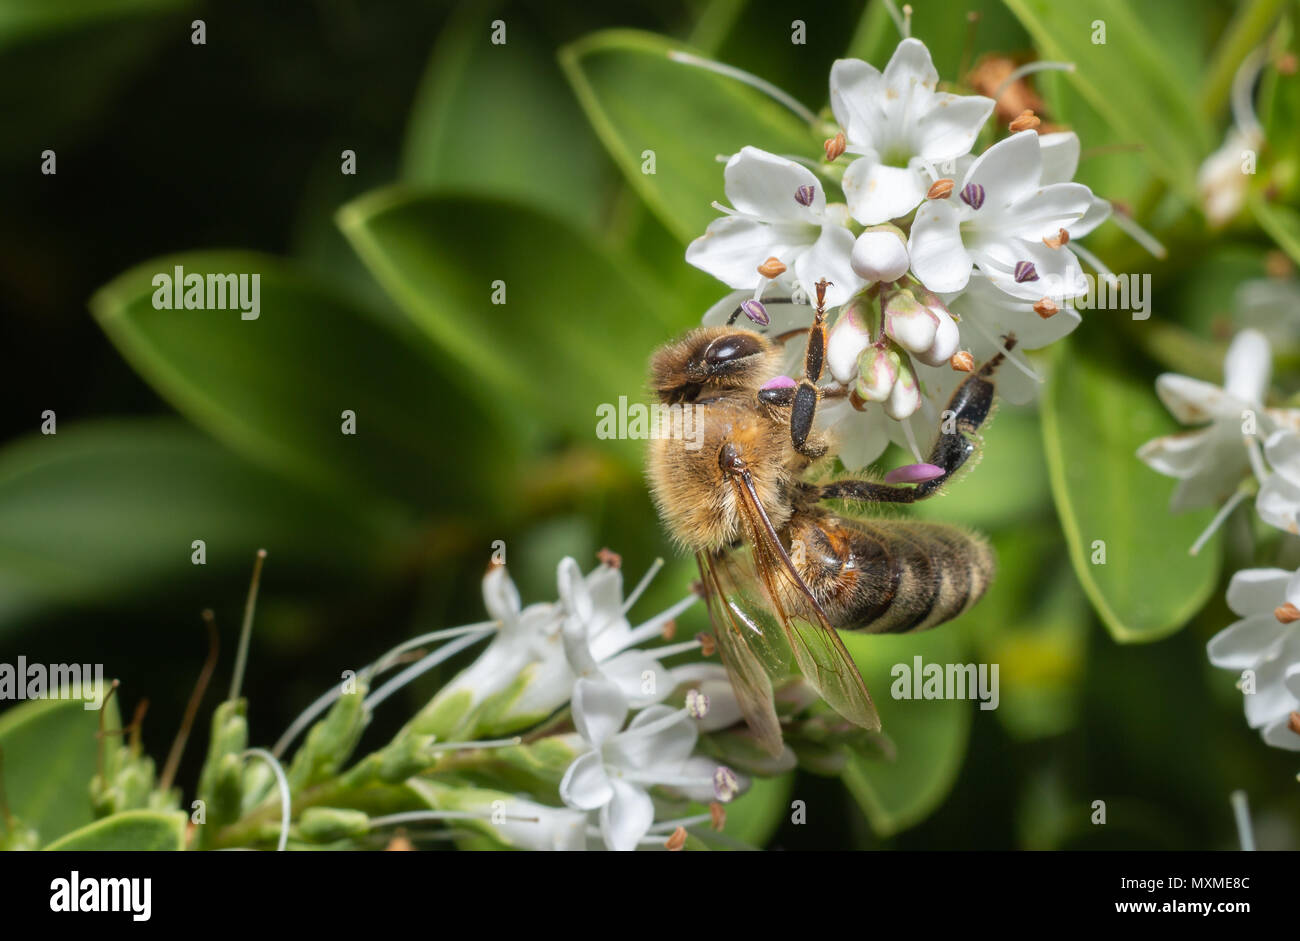 close up of a wild bee gathering nectar from white flowers Stock Photo